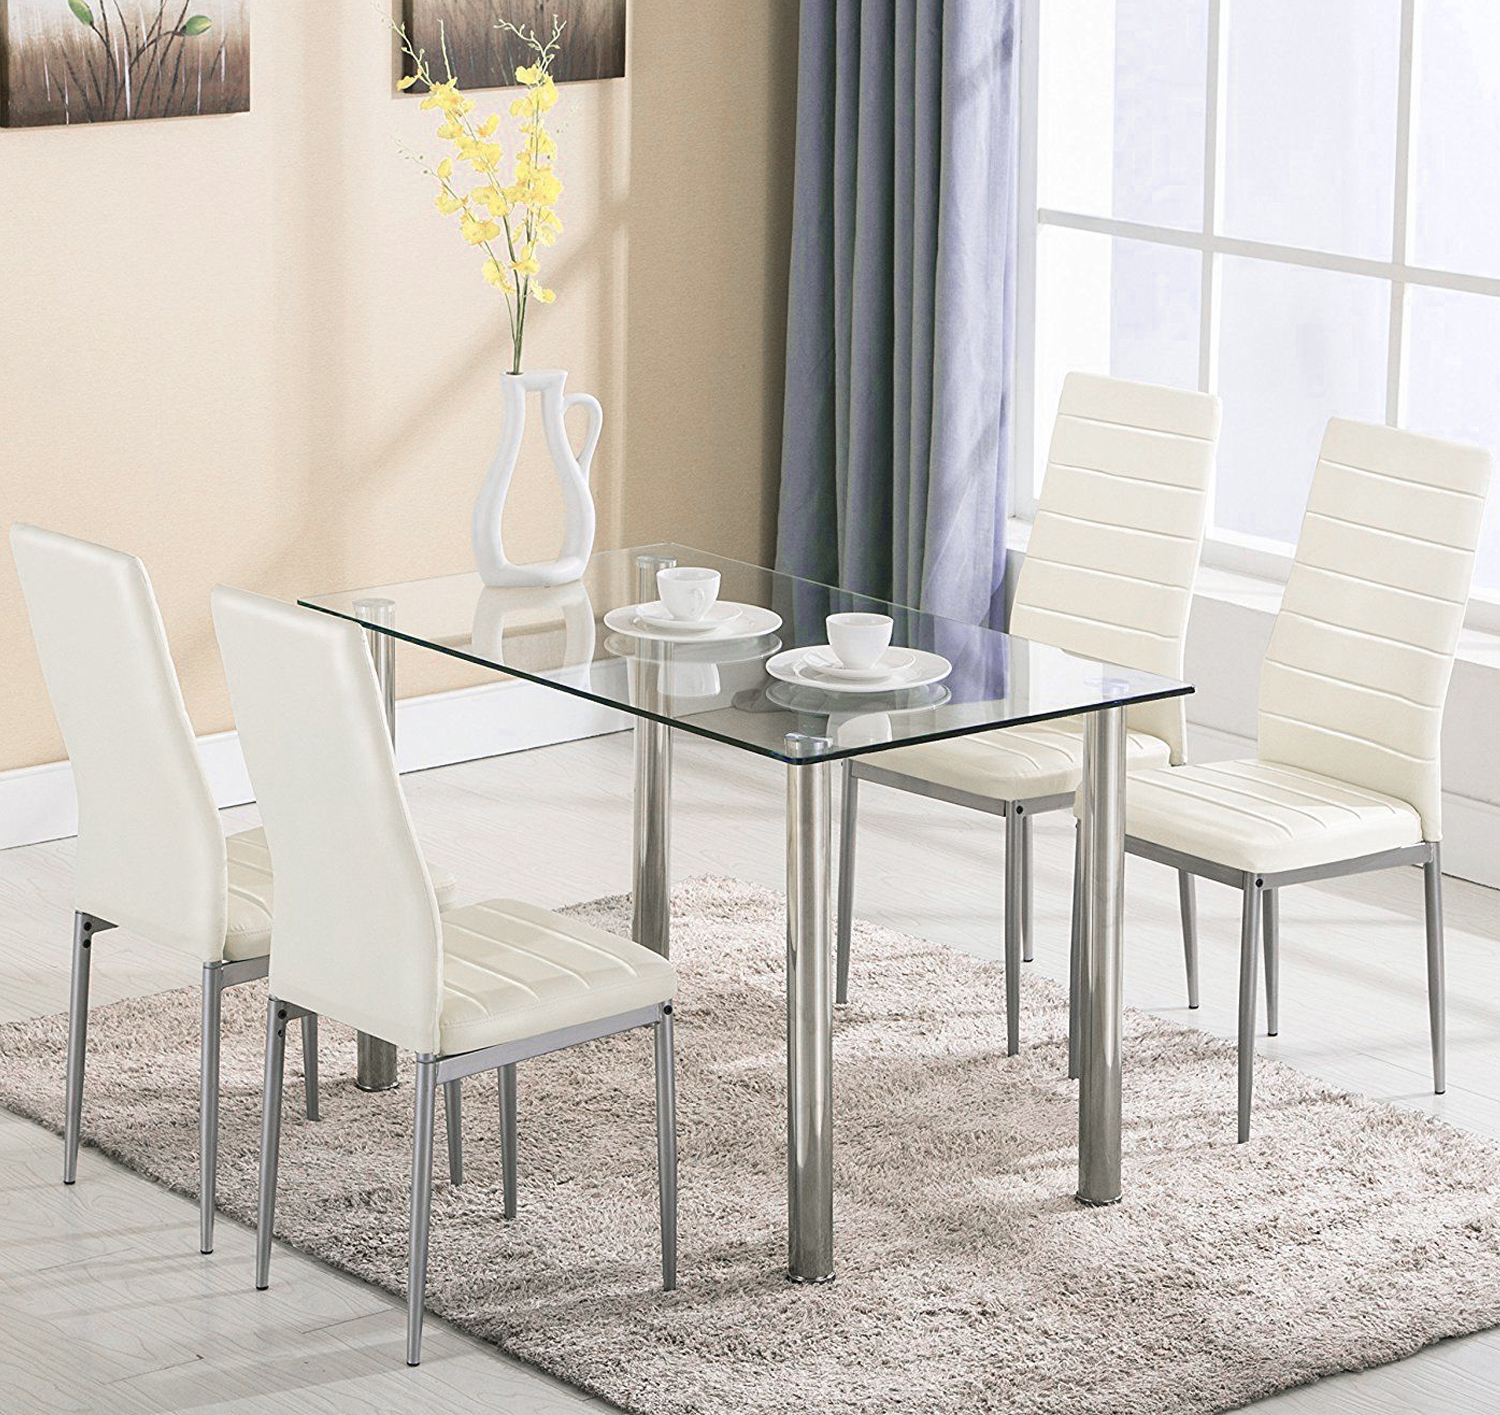 Ktaxon 5 Piece Dining Table Set Dining Table & 4 Leather Chairs,Glass Top Kitchen Dining Room Furniture,White - image 4 of 7